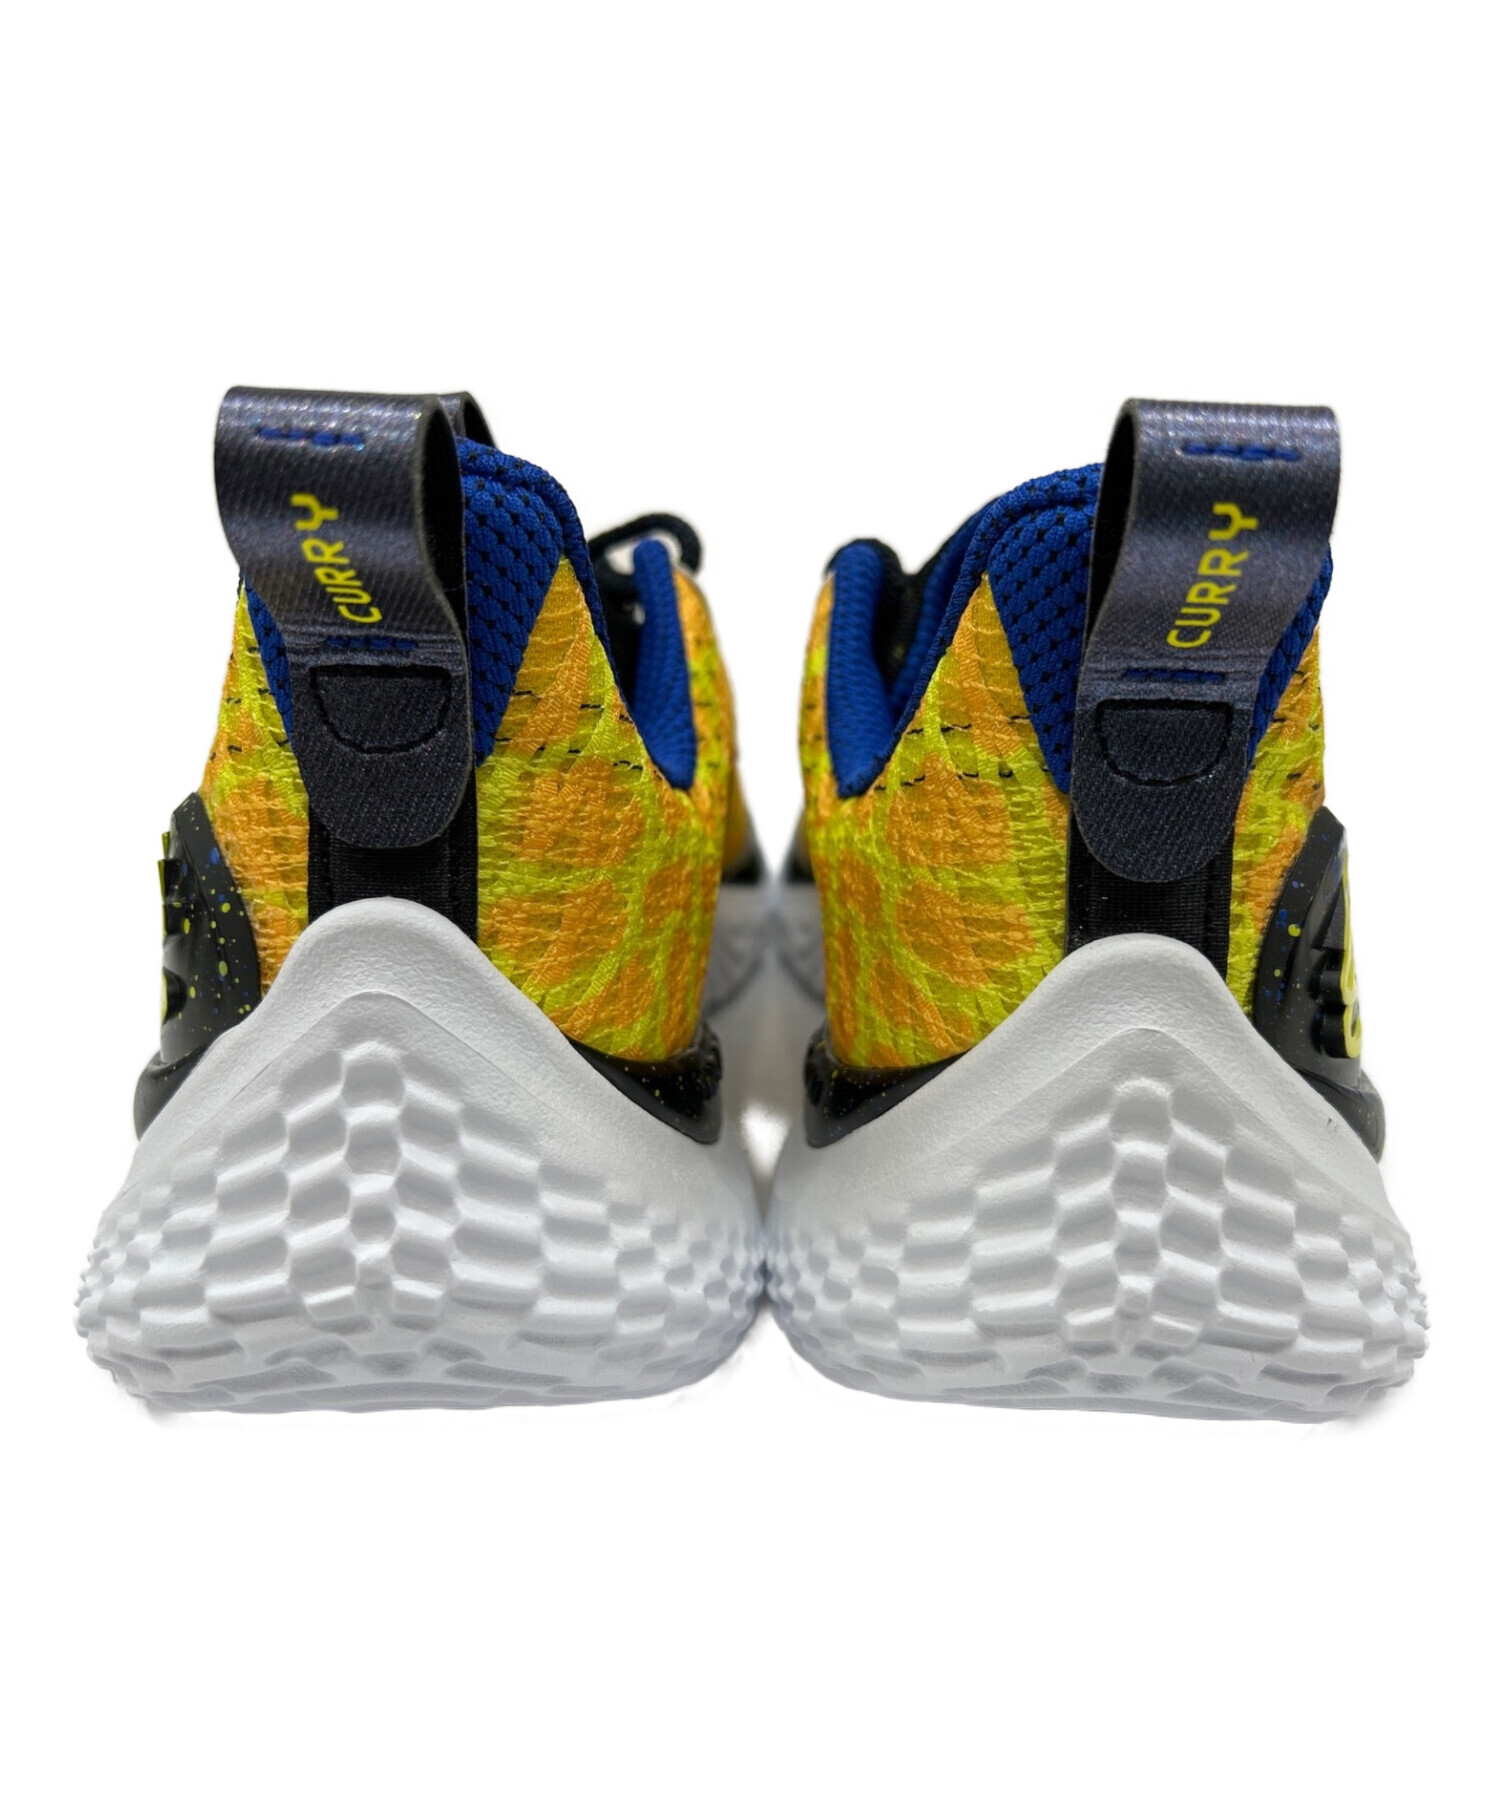 UNDER ARMOUR (アンダー アーマー) Curry10 DOUBLE BANG カリー10 イエロー サイズ:28.5cm